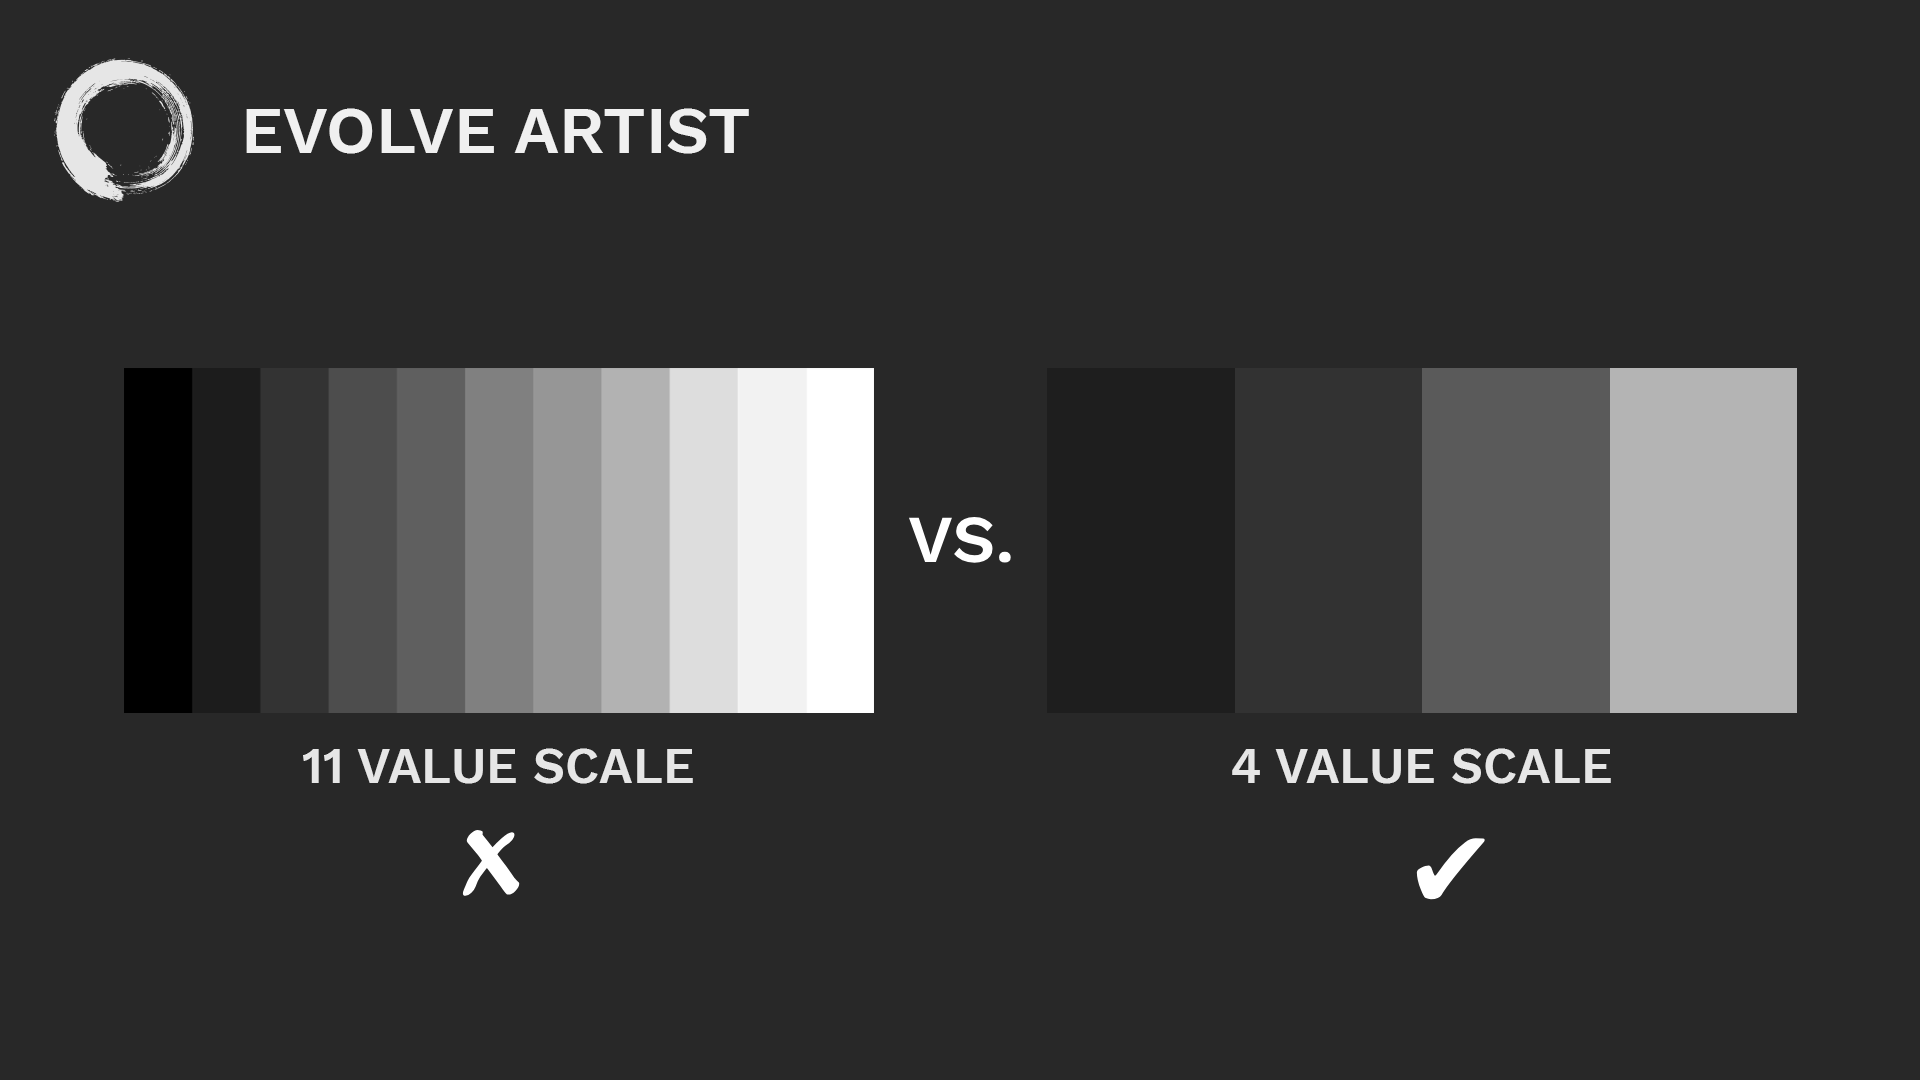 You'll see a more complex 9-11 value scale at Watts Atelier vs. Evolve Artist's four value scale.